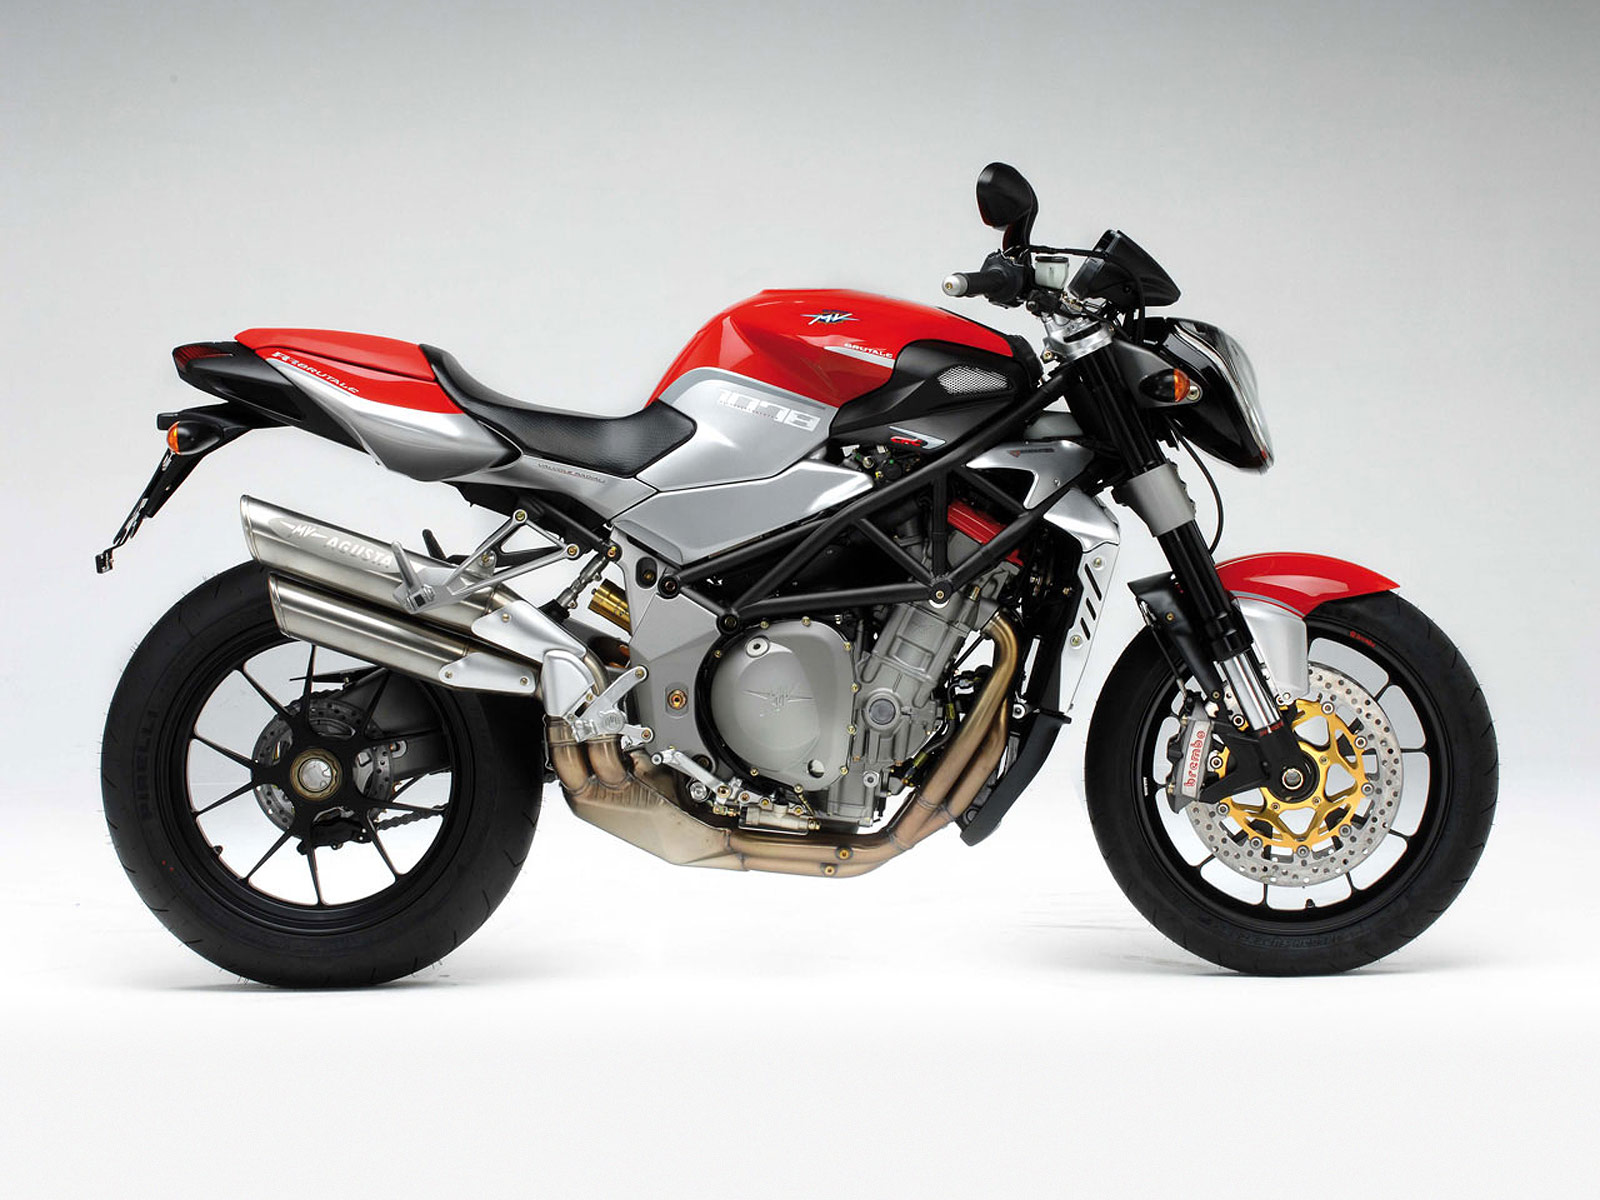 Motorcycle brand, pictures, specification, review, insurance